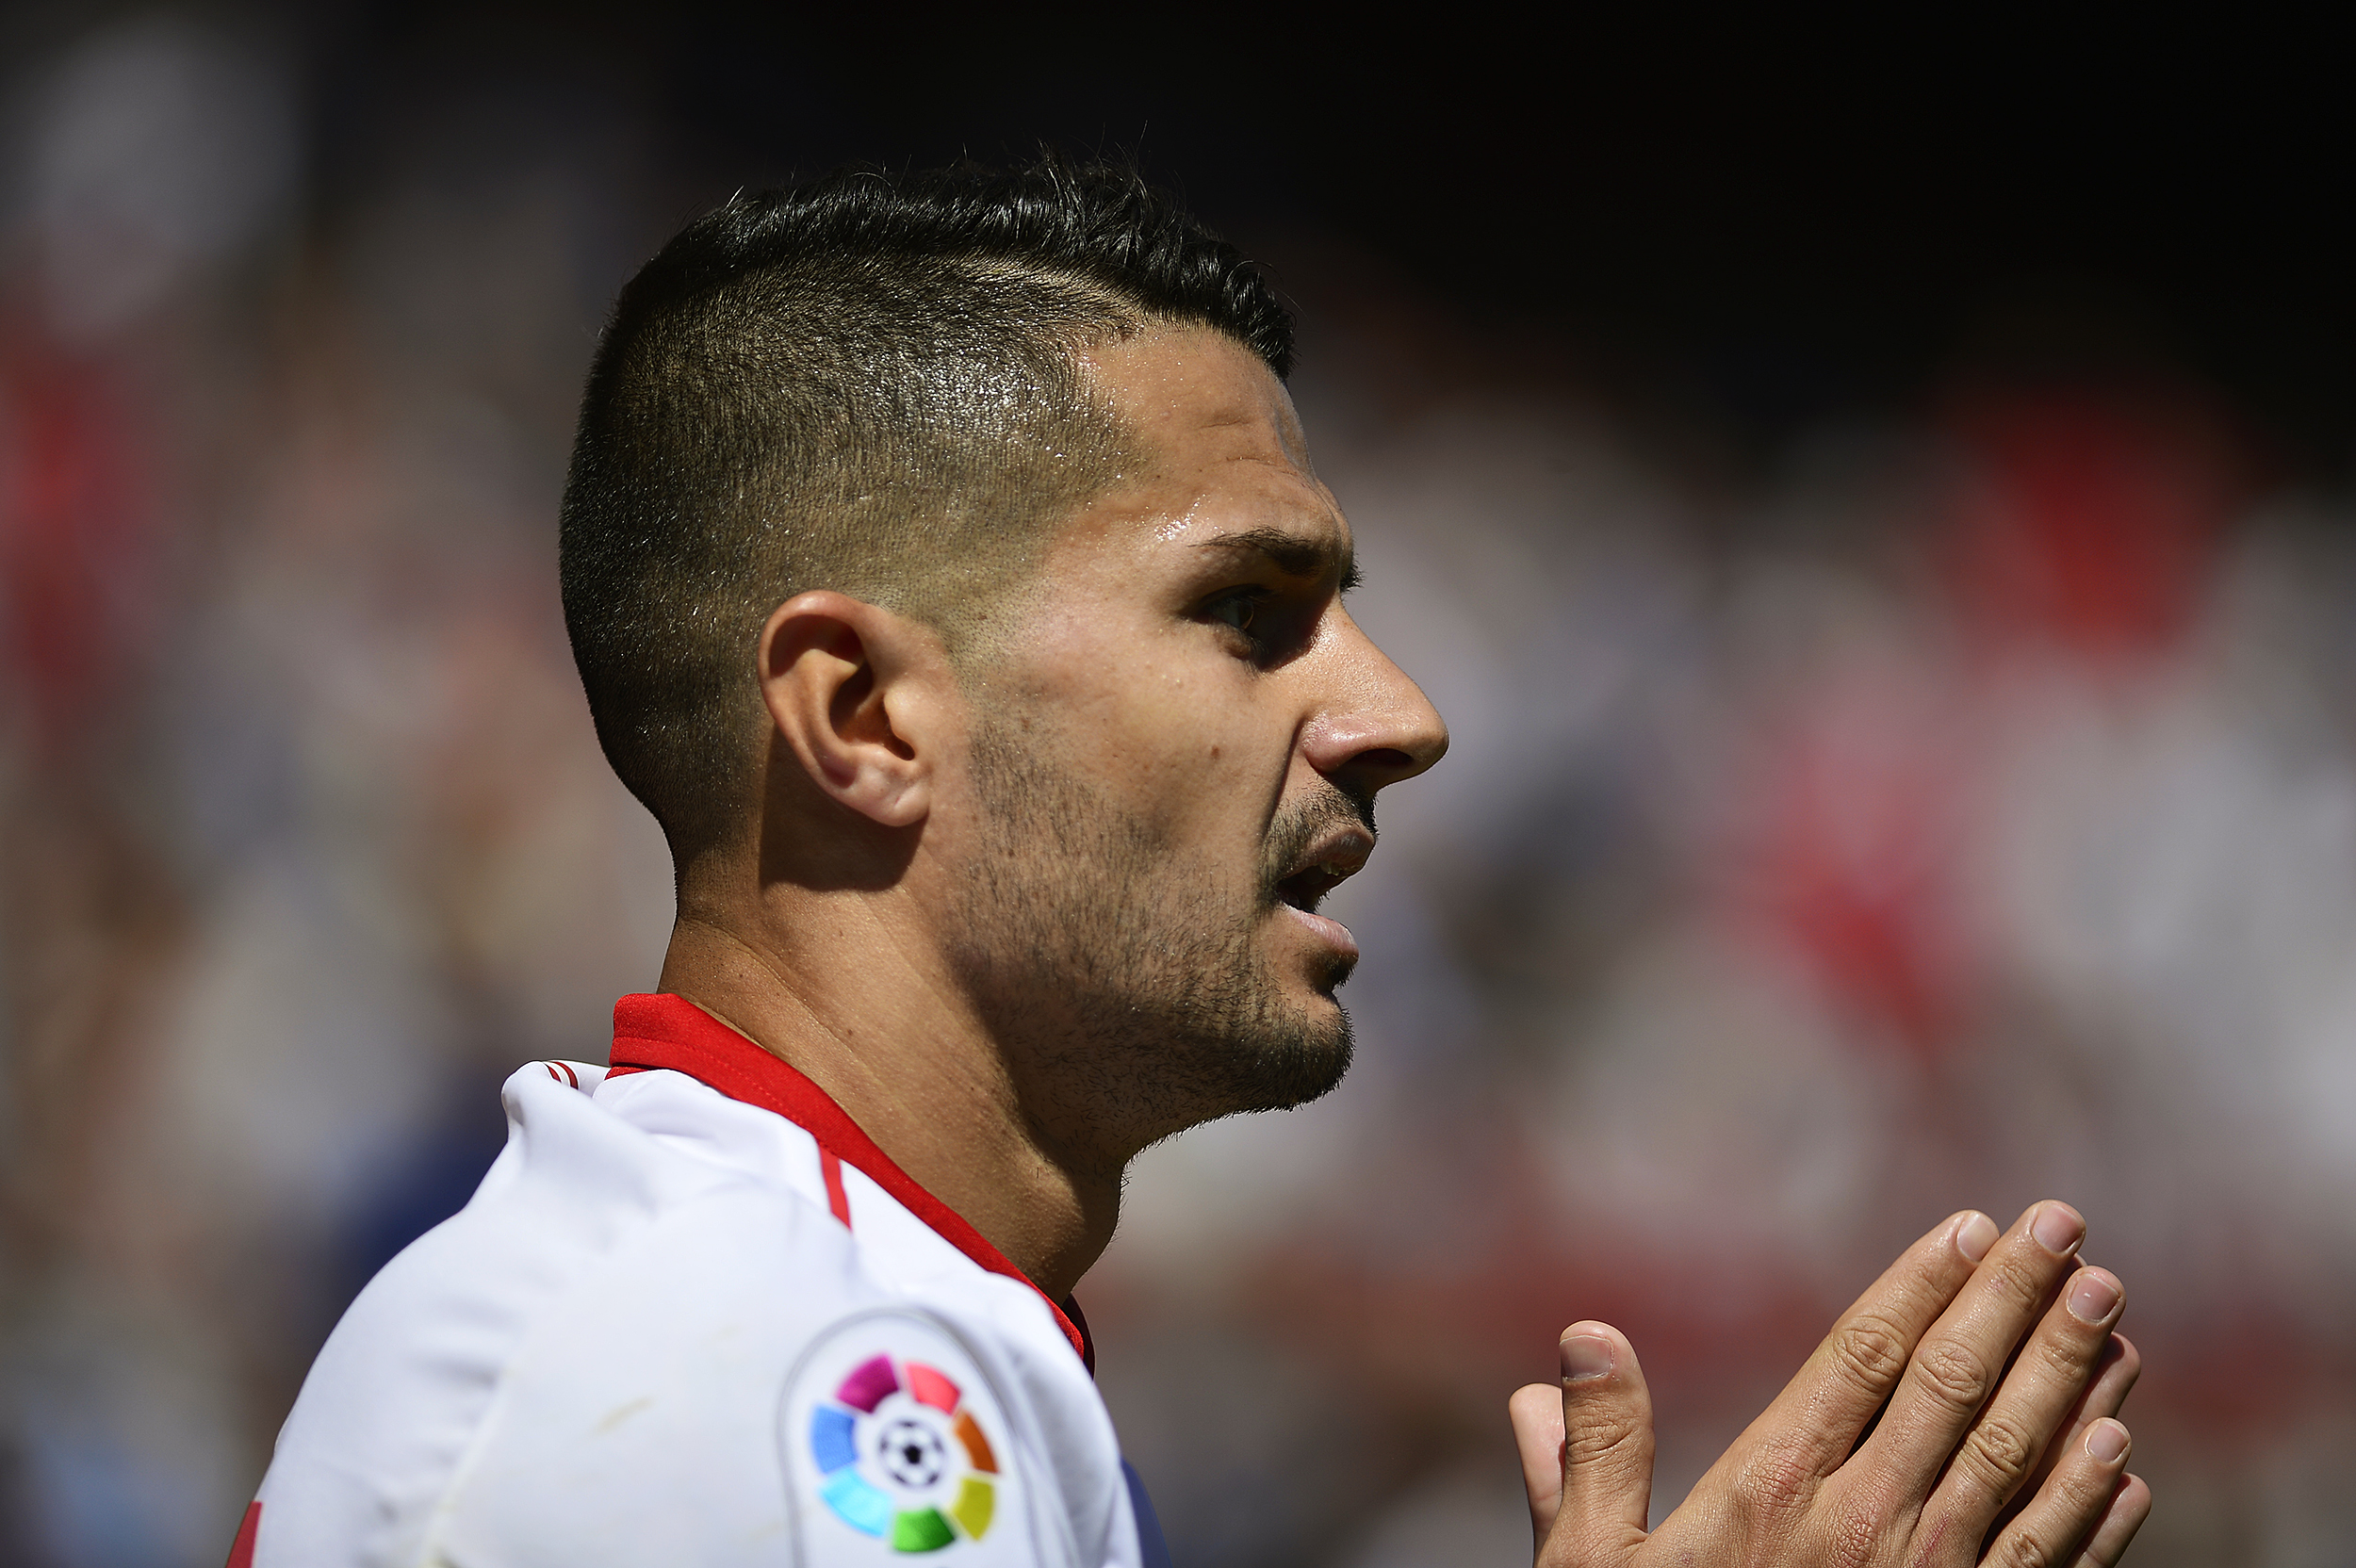 Sevilla's midfielder Vitolo gestures to the referee during the Spanish league football match Sevilla FC vs Real Sporting de Gijon at the Ramon Sanchez Pizjuan stadium in Sevilla on April 2, 2017. / AFP PHOTO / CRISTINA QUICLER        (Photo credit should read CRISTINA QUICLER/AFP/Getty Images)